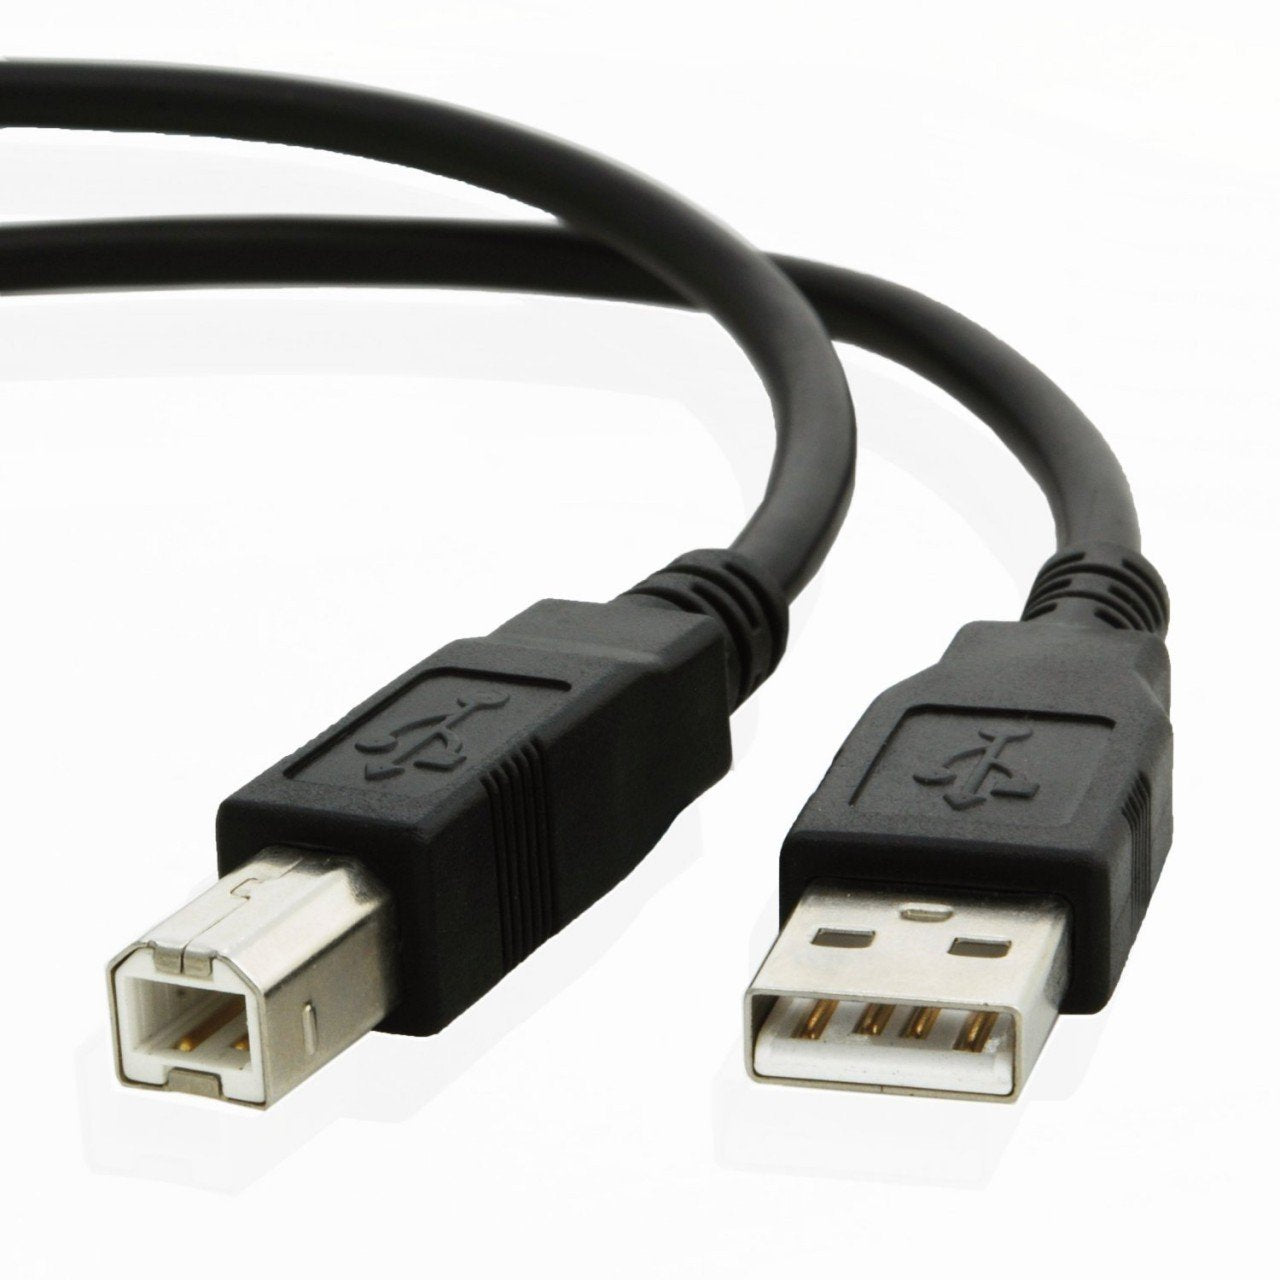 USB cable for Canon PIXMA G2200